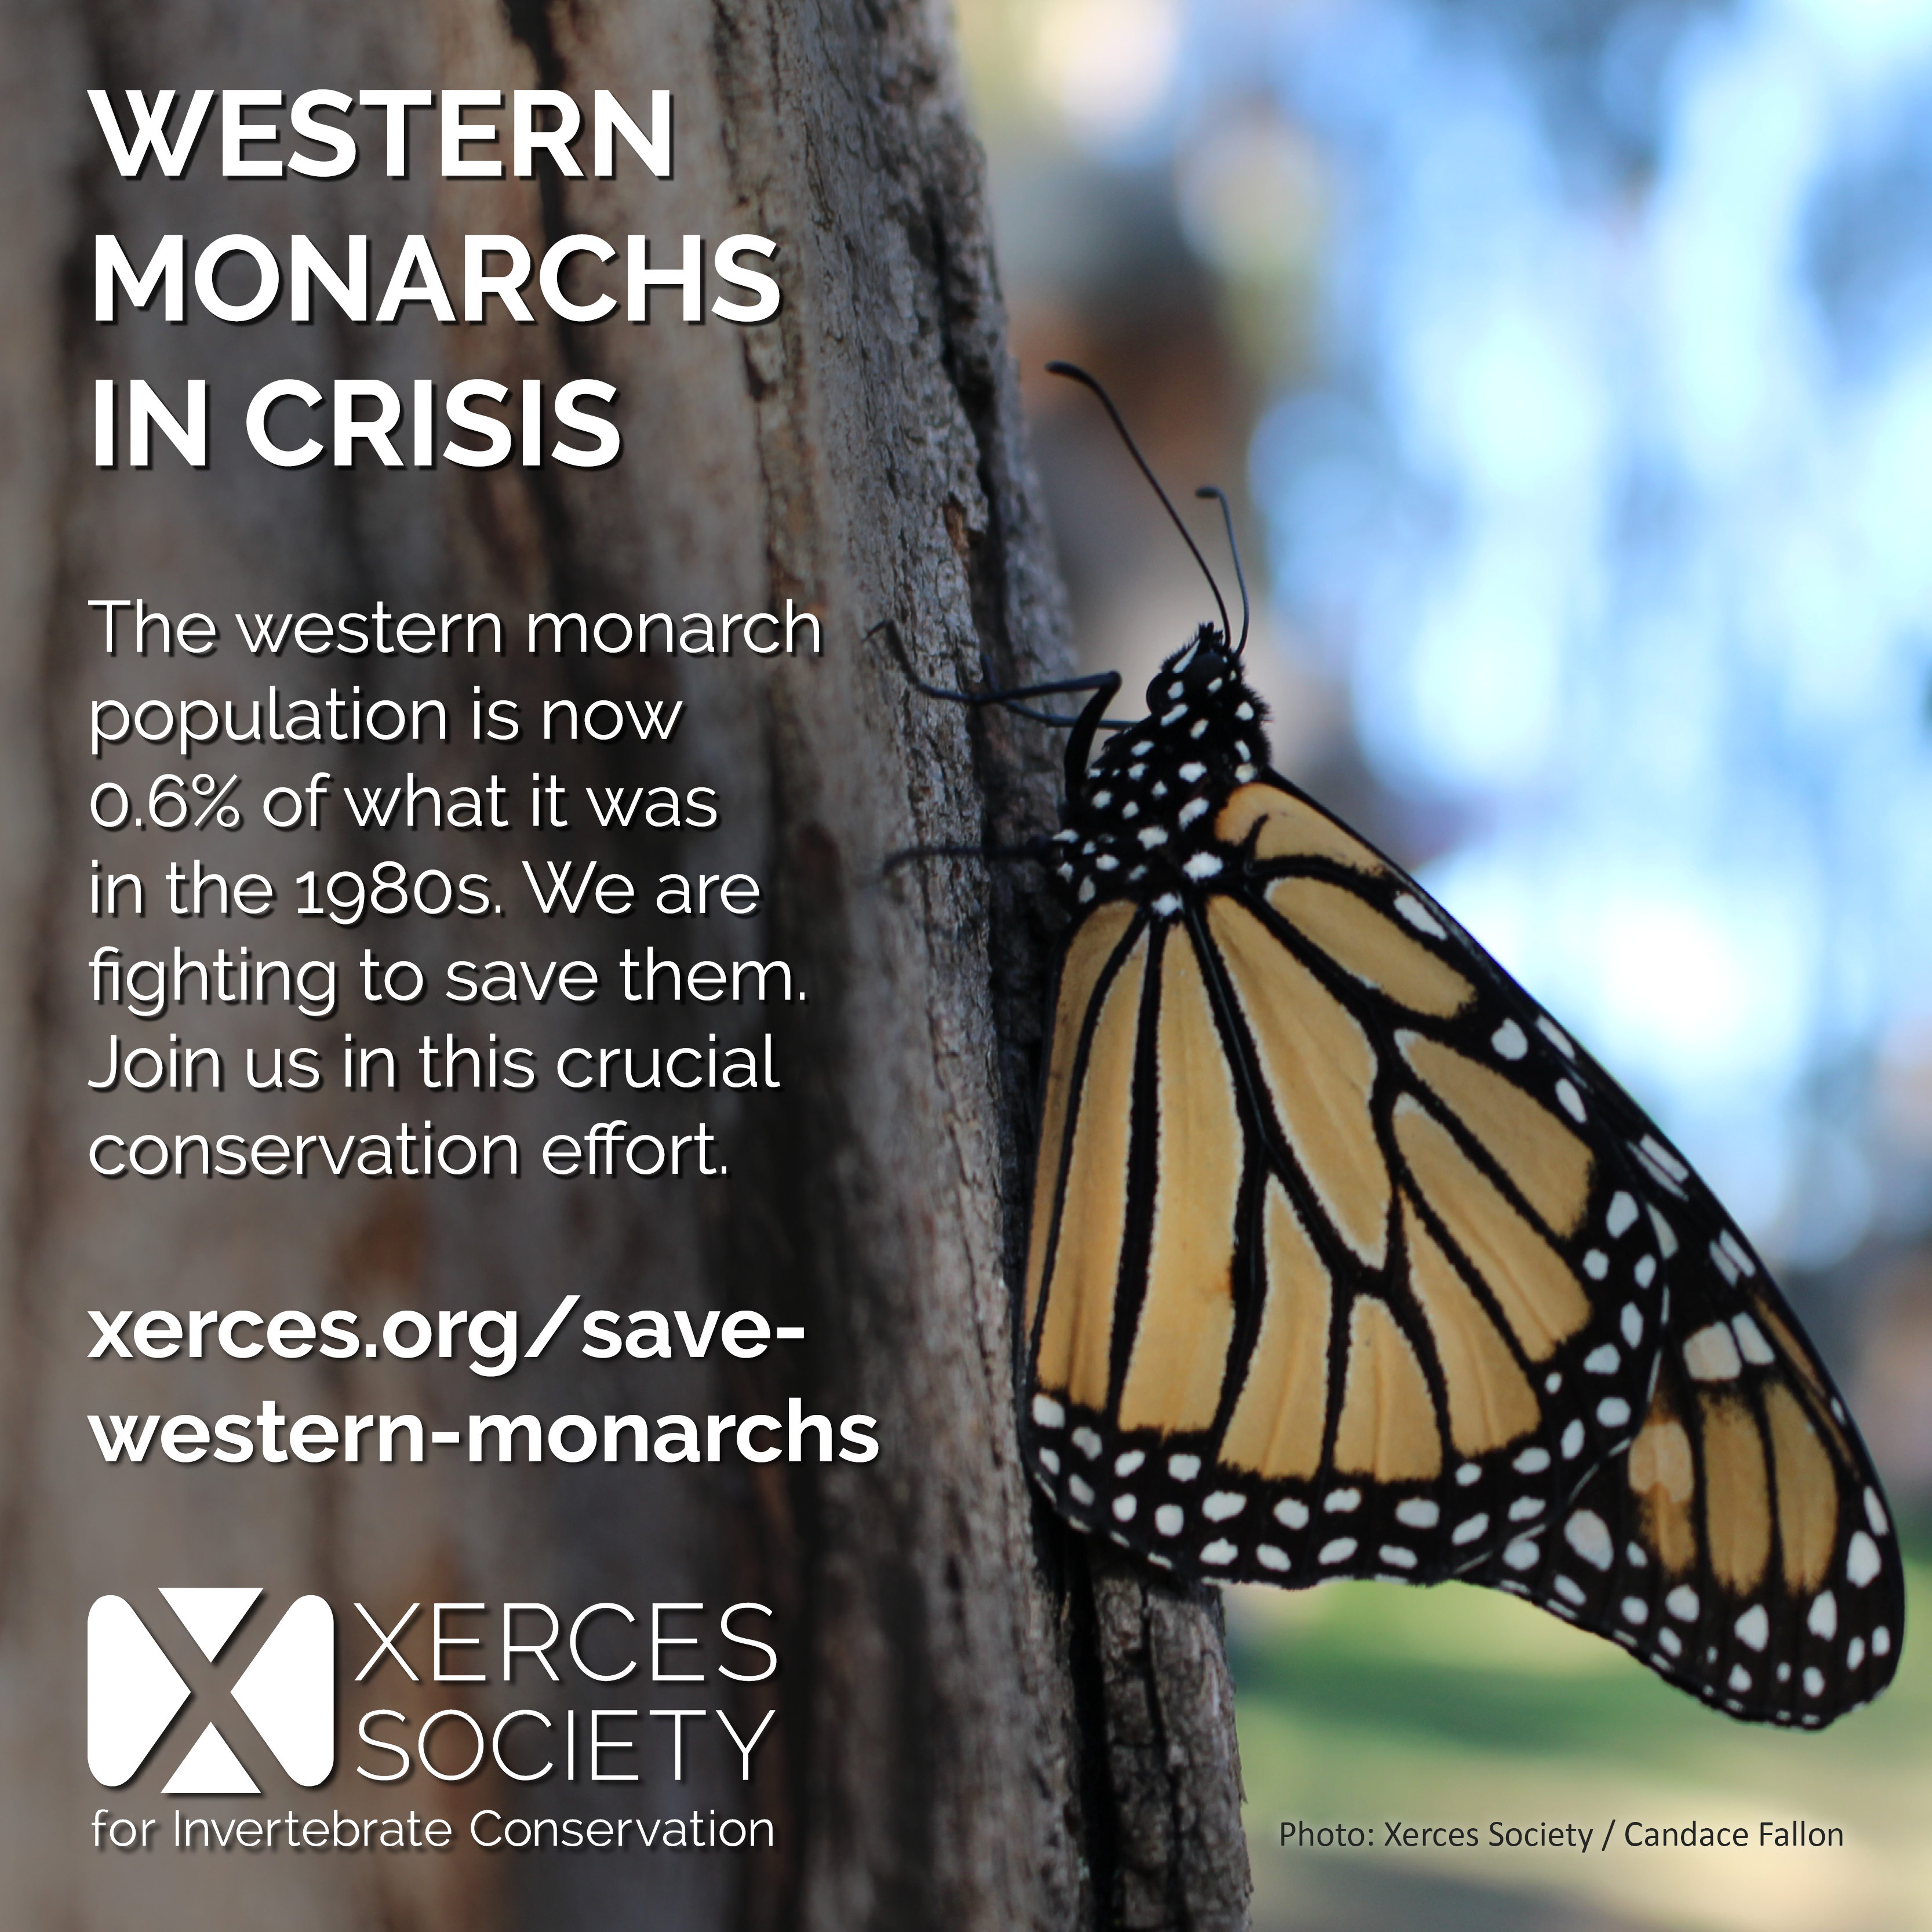 This graphic lays out the basic problem (a 99% population decline since the 1980s), and provides a link to savewesternmonarchs.org.